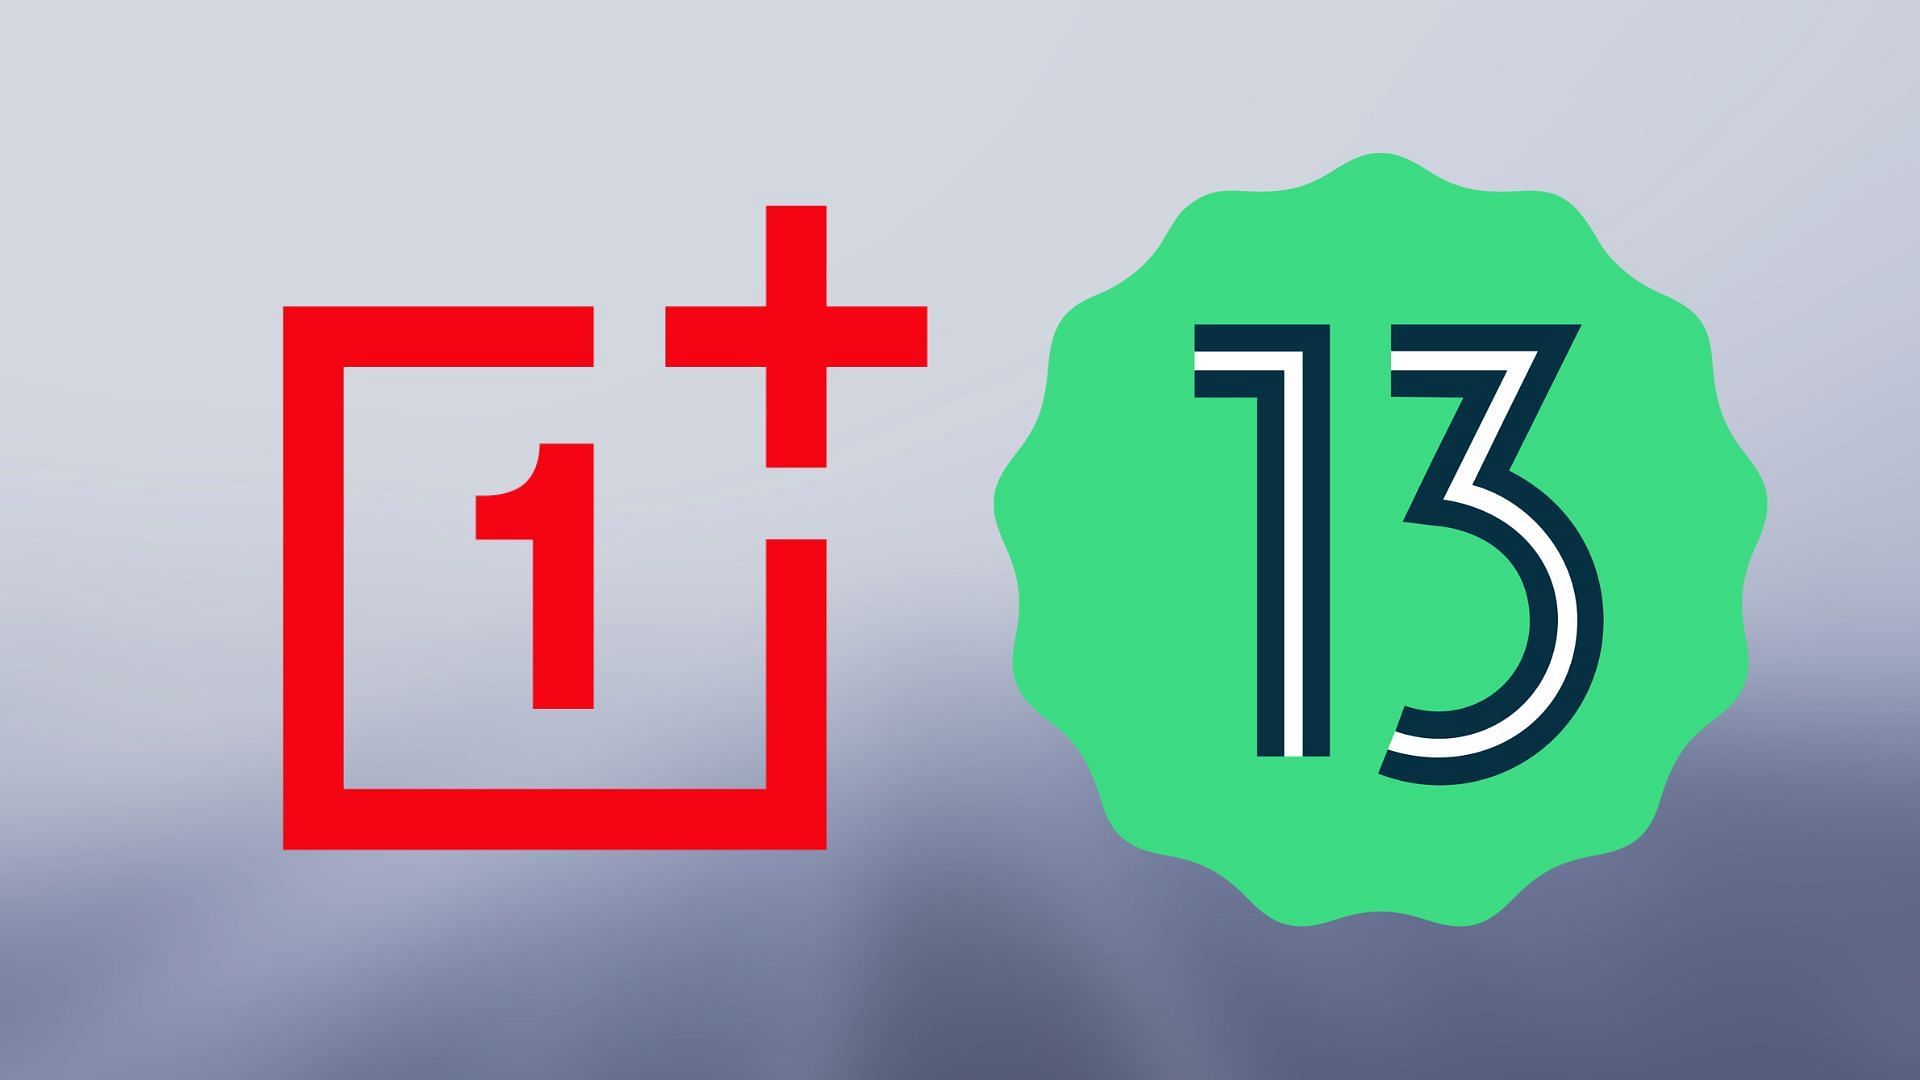 OnePlus and Android 13 logos (Image via OnePlus and Wikipedia)